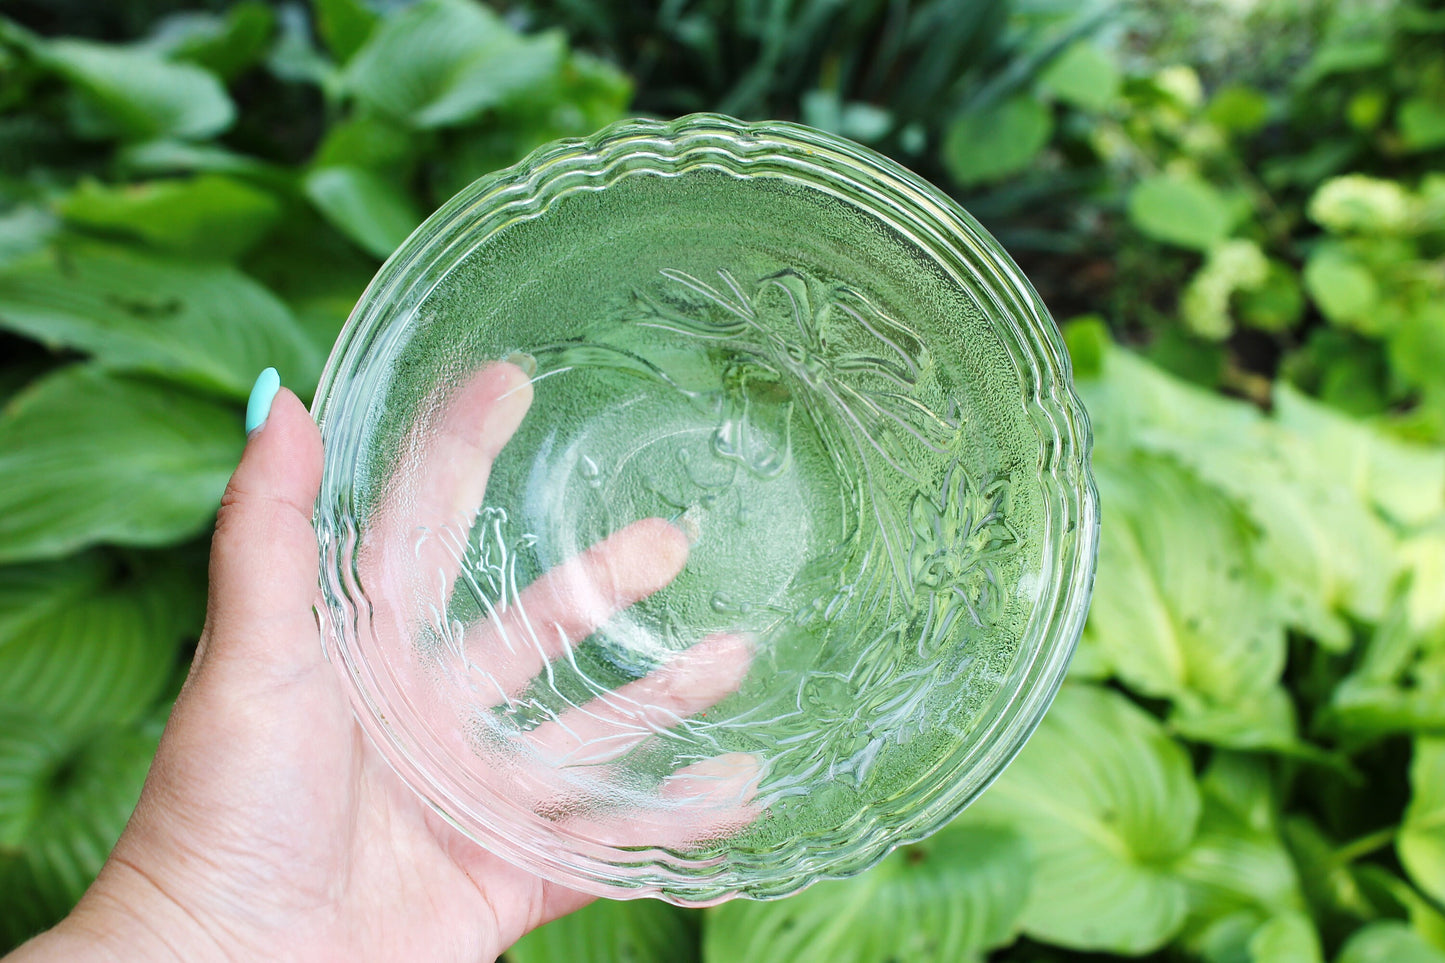 Vintage USSR glass bowl for punch 6.7 inches, Round plate for salad or a vase for sweets - Tableware USSR kitchen - 1970s